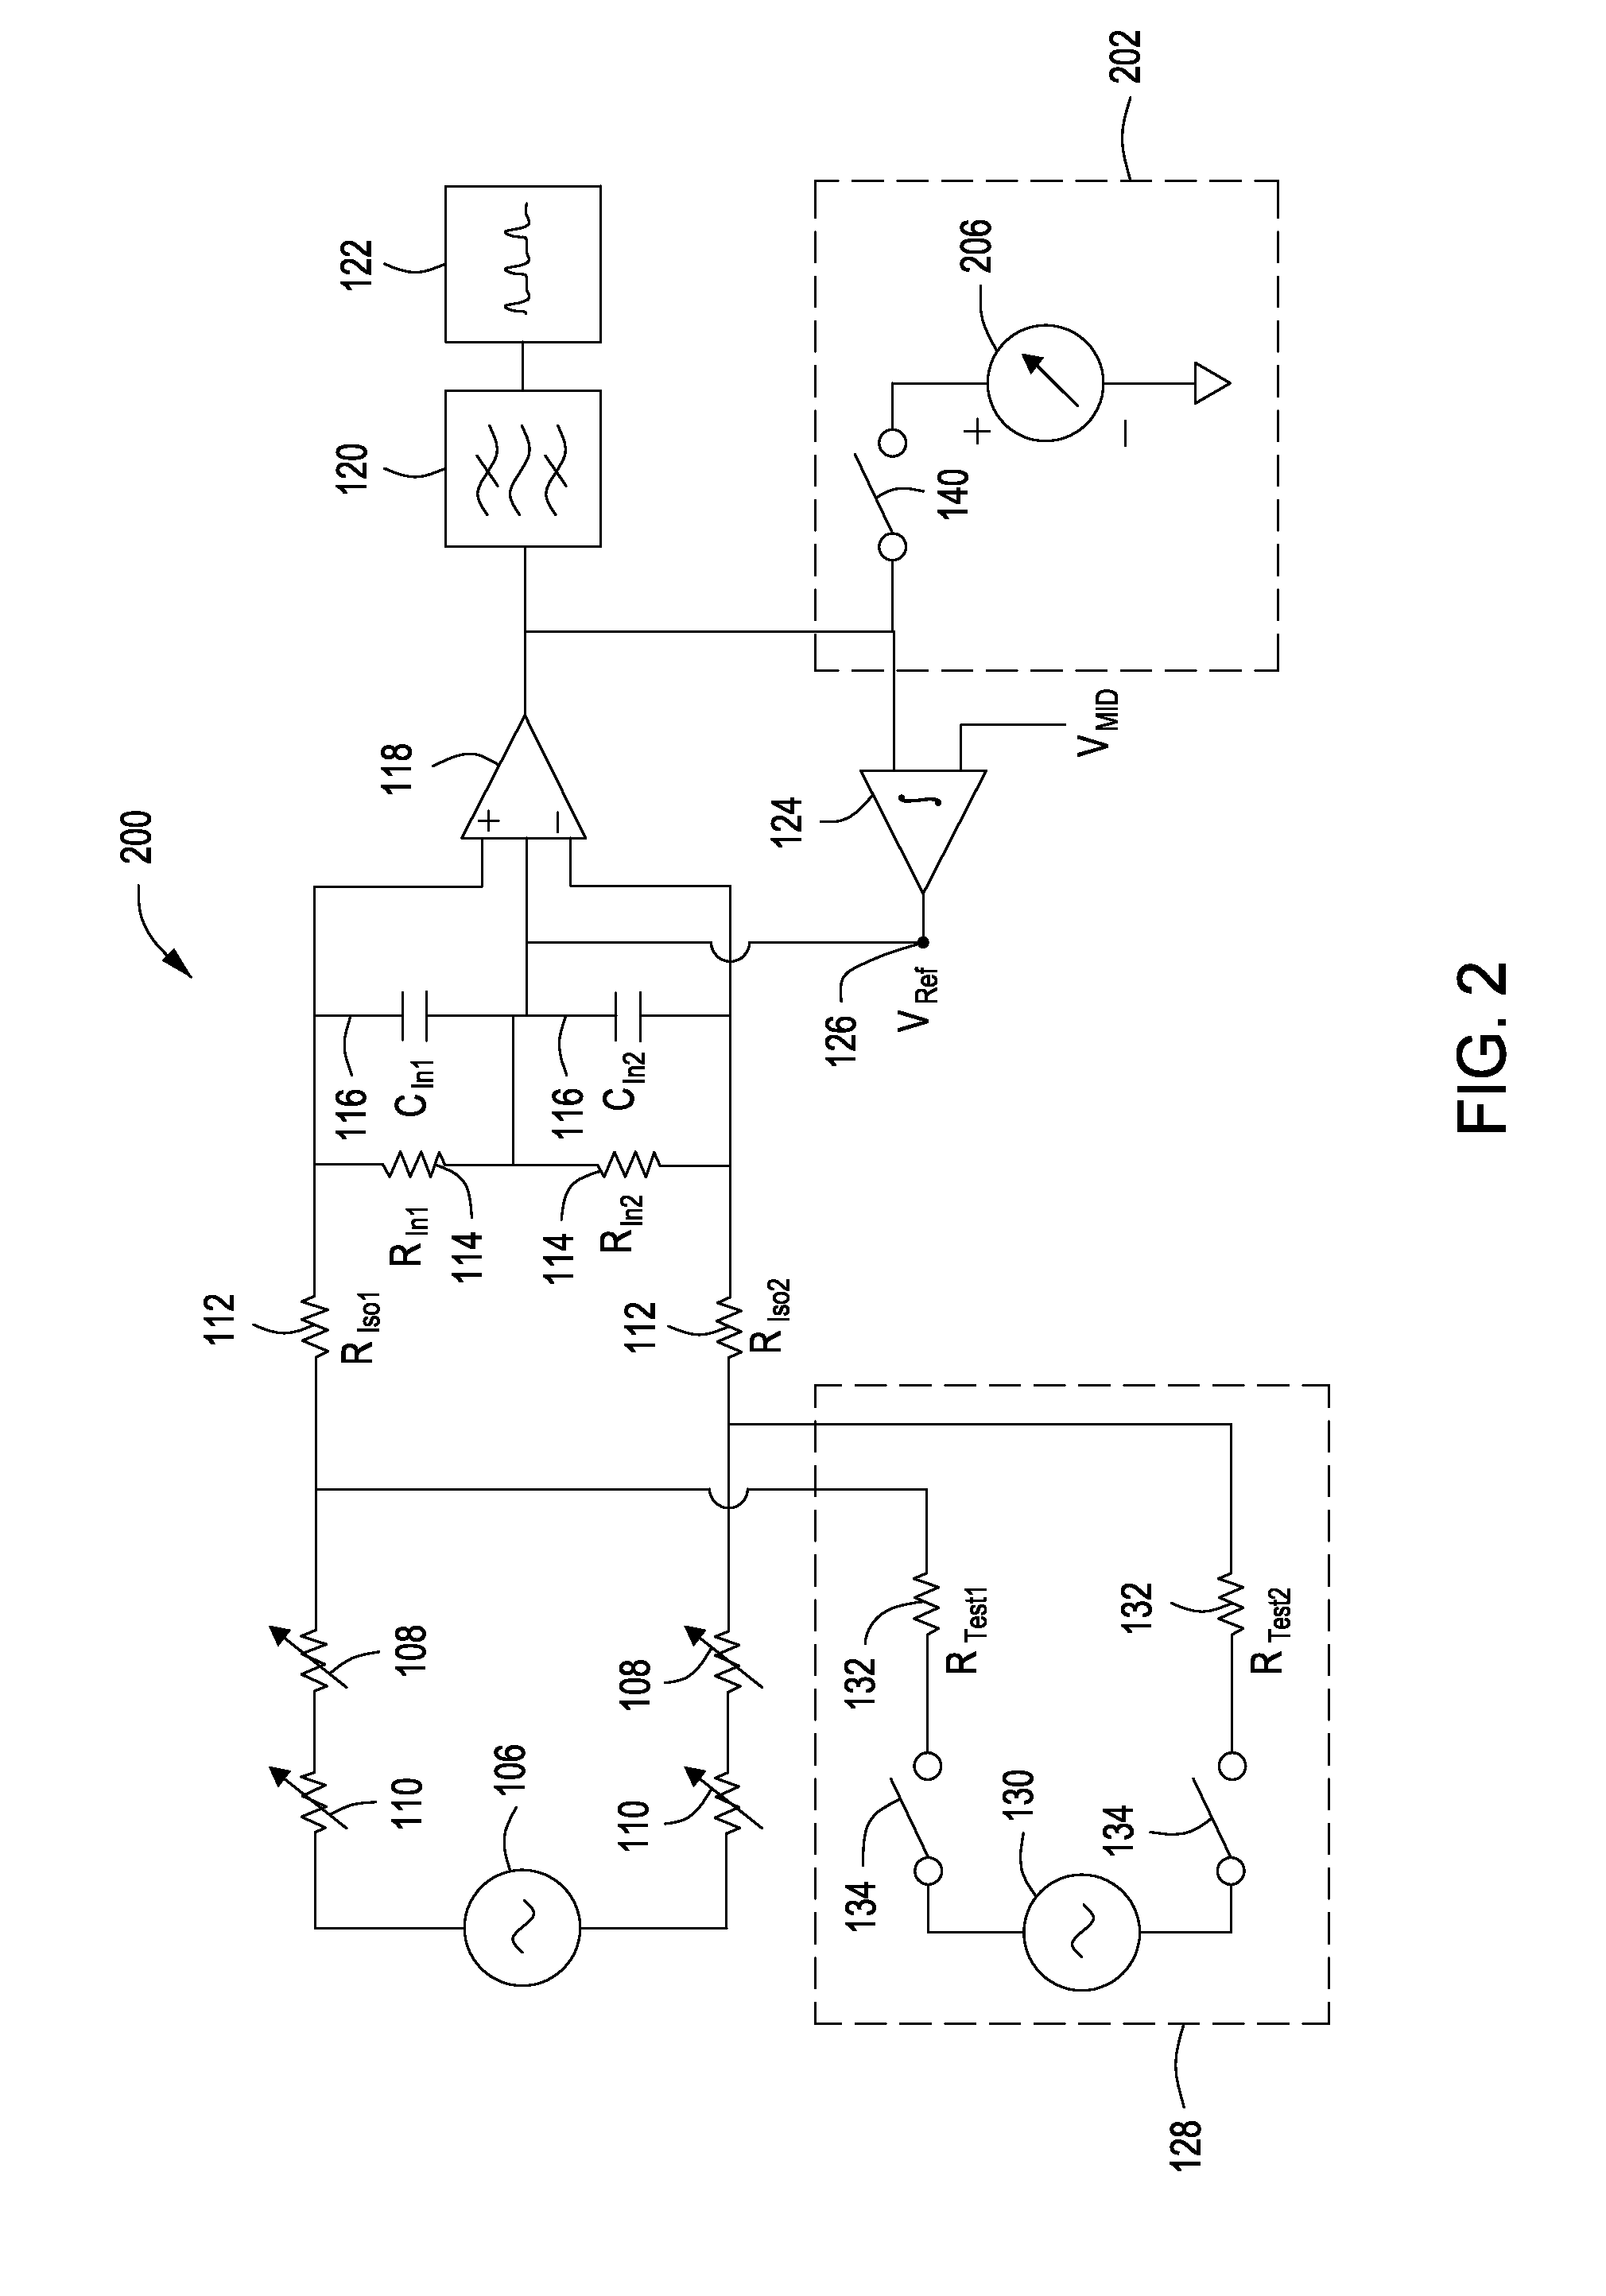 Method and apparatus to determine impedance variations in a skin/electrode interface